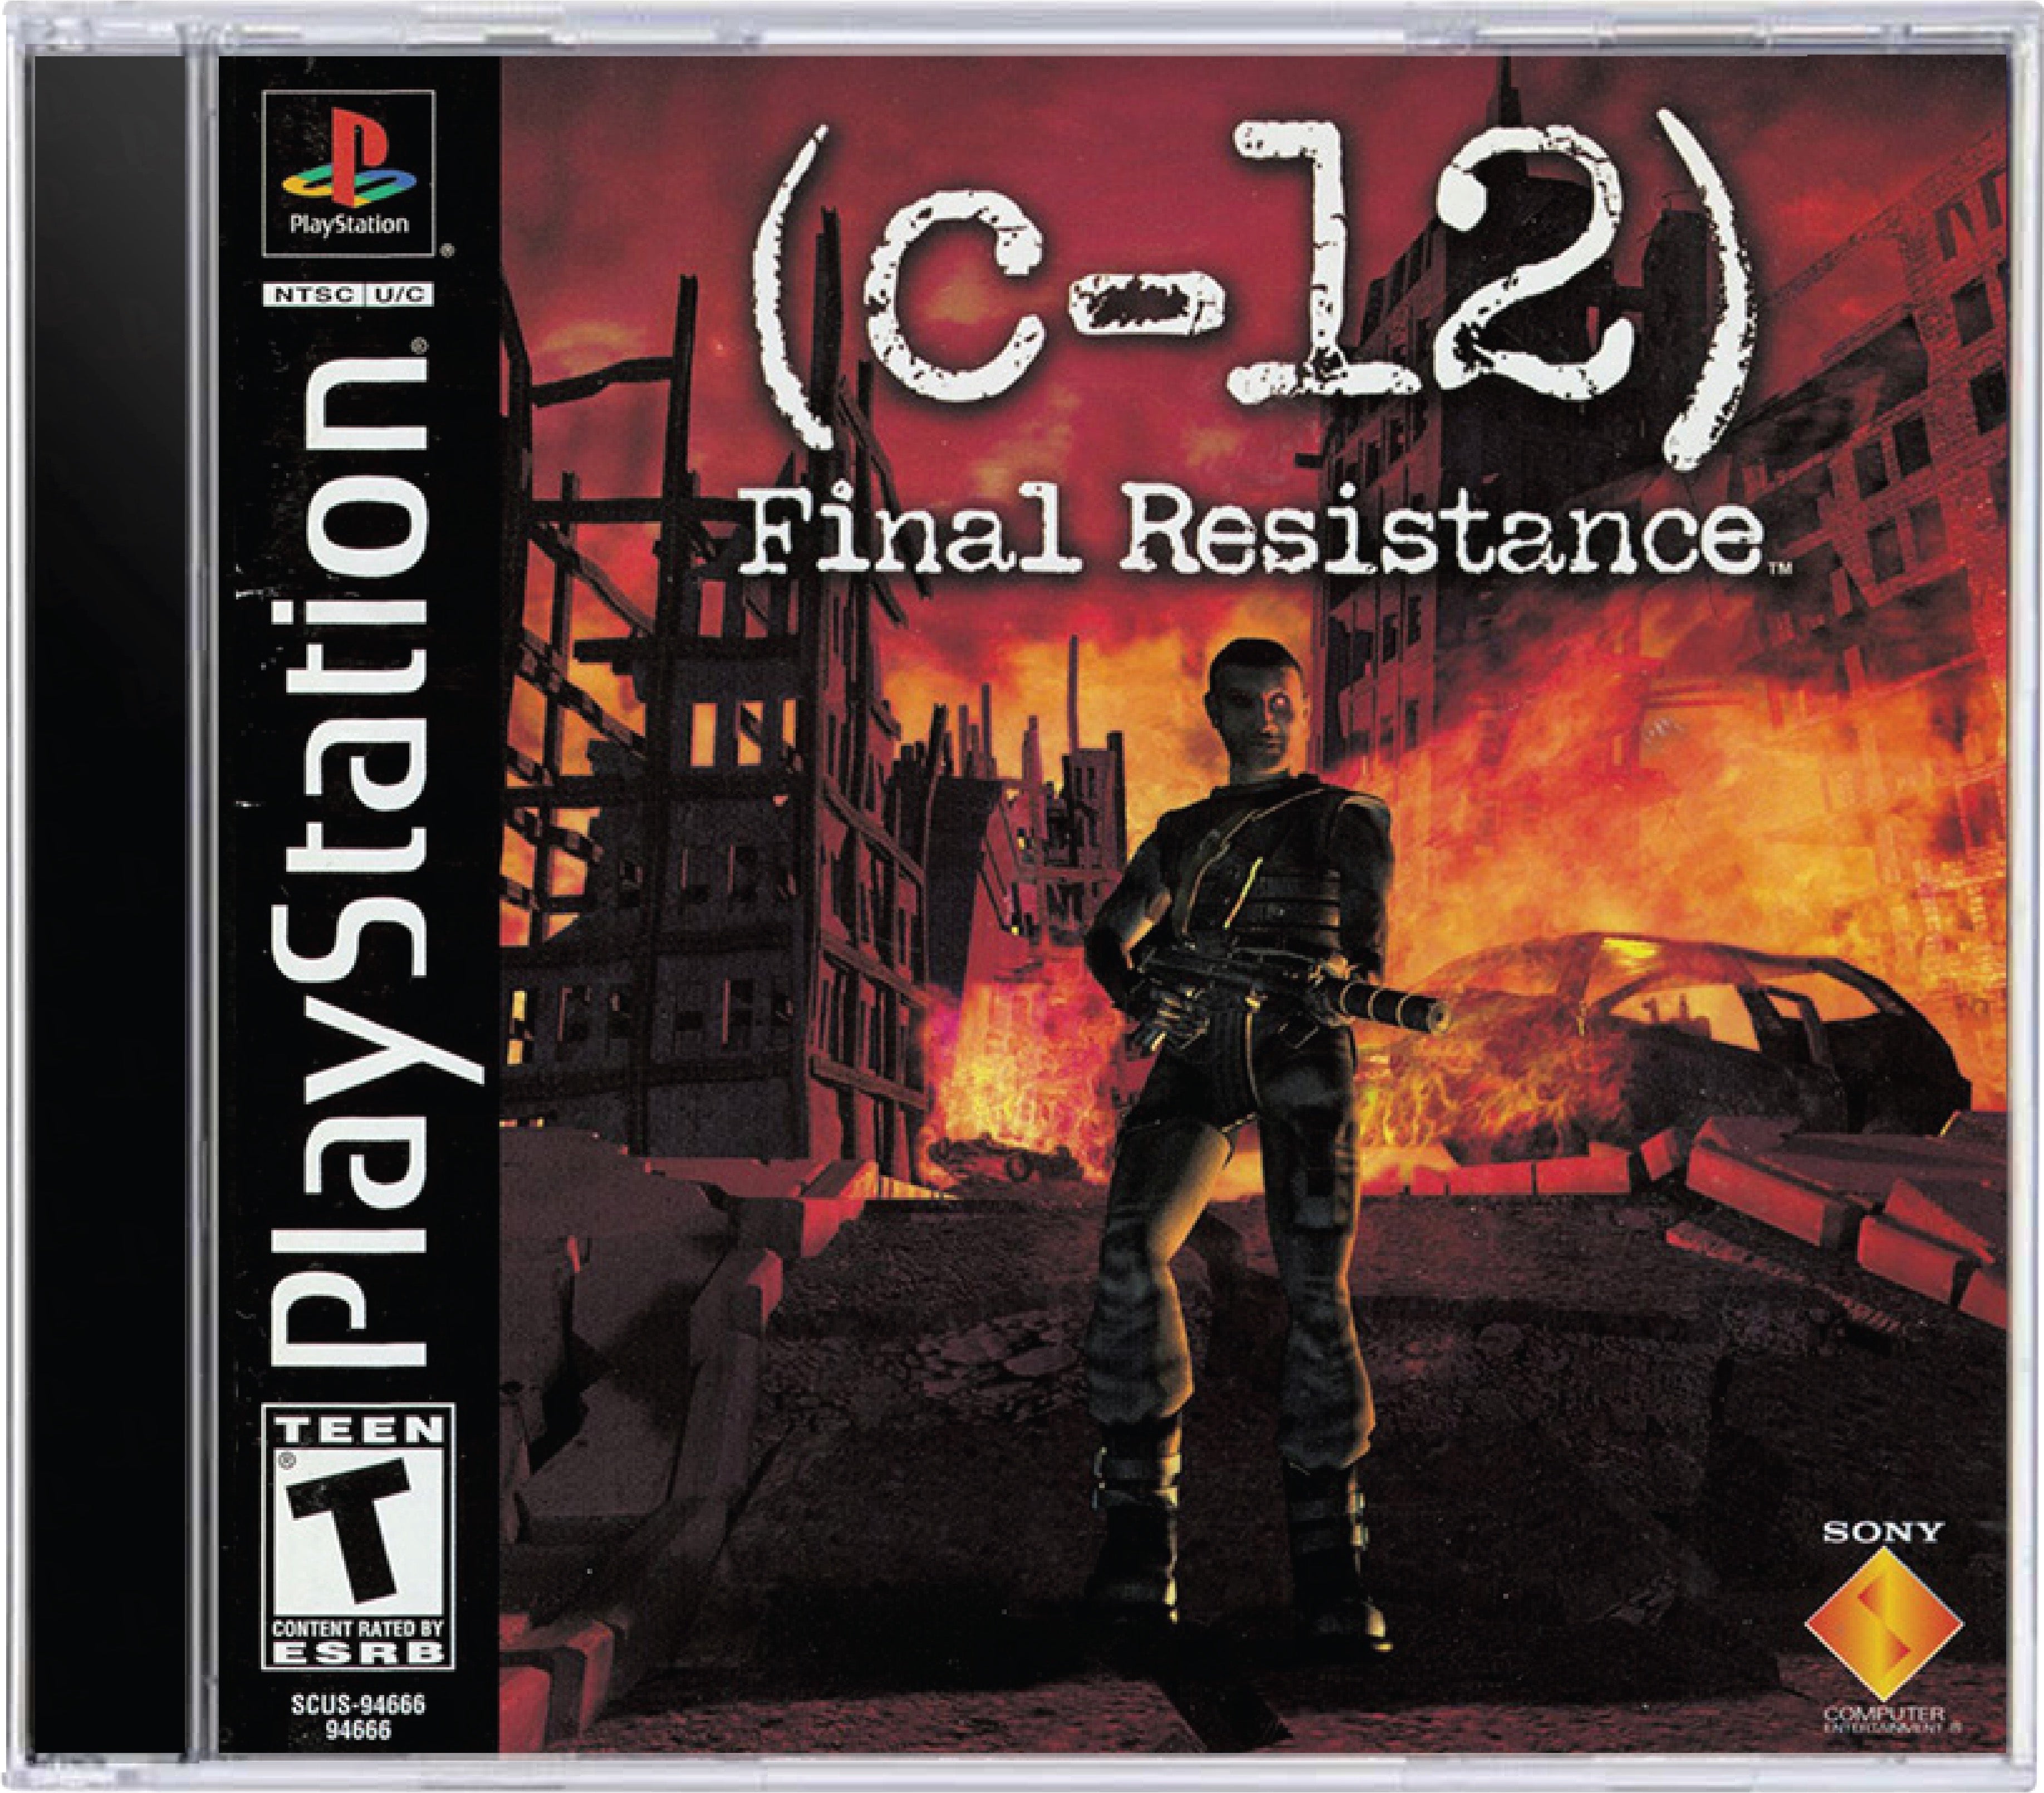 C-12 Final Resistance Cover Art and Product Photo